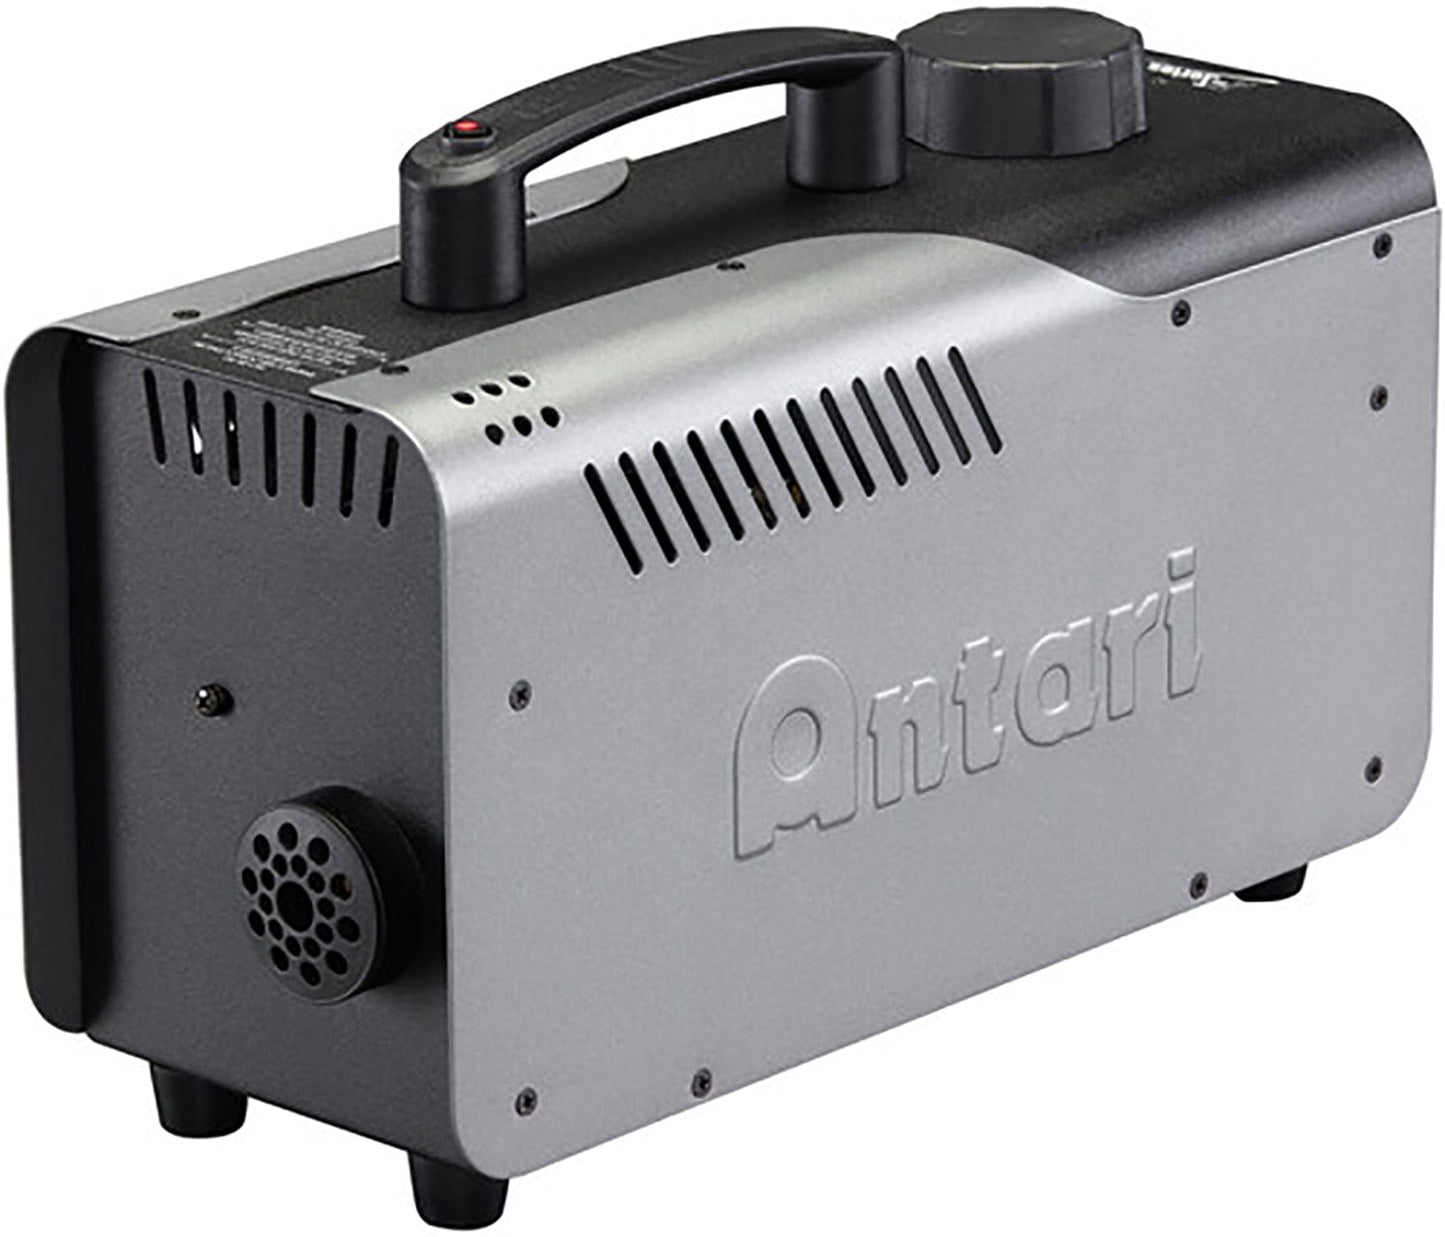 Antari Z-800III 800-Watt Fog Machine with Continuous Output - PSSL ProSound and Stage Lighting